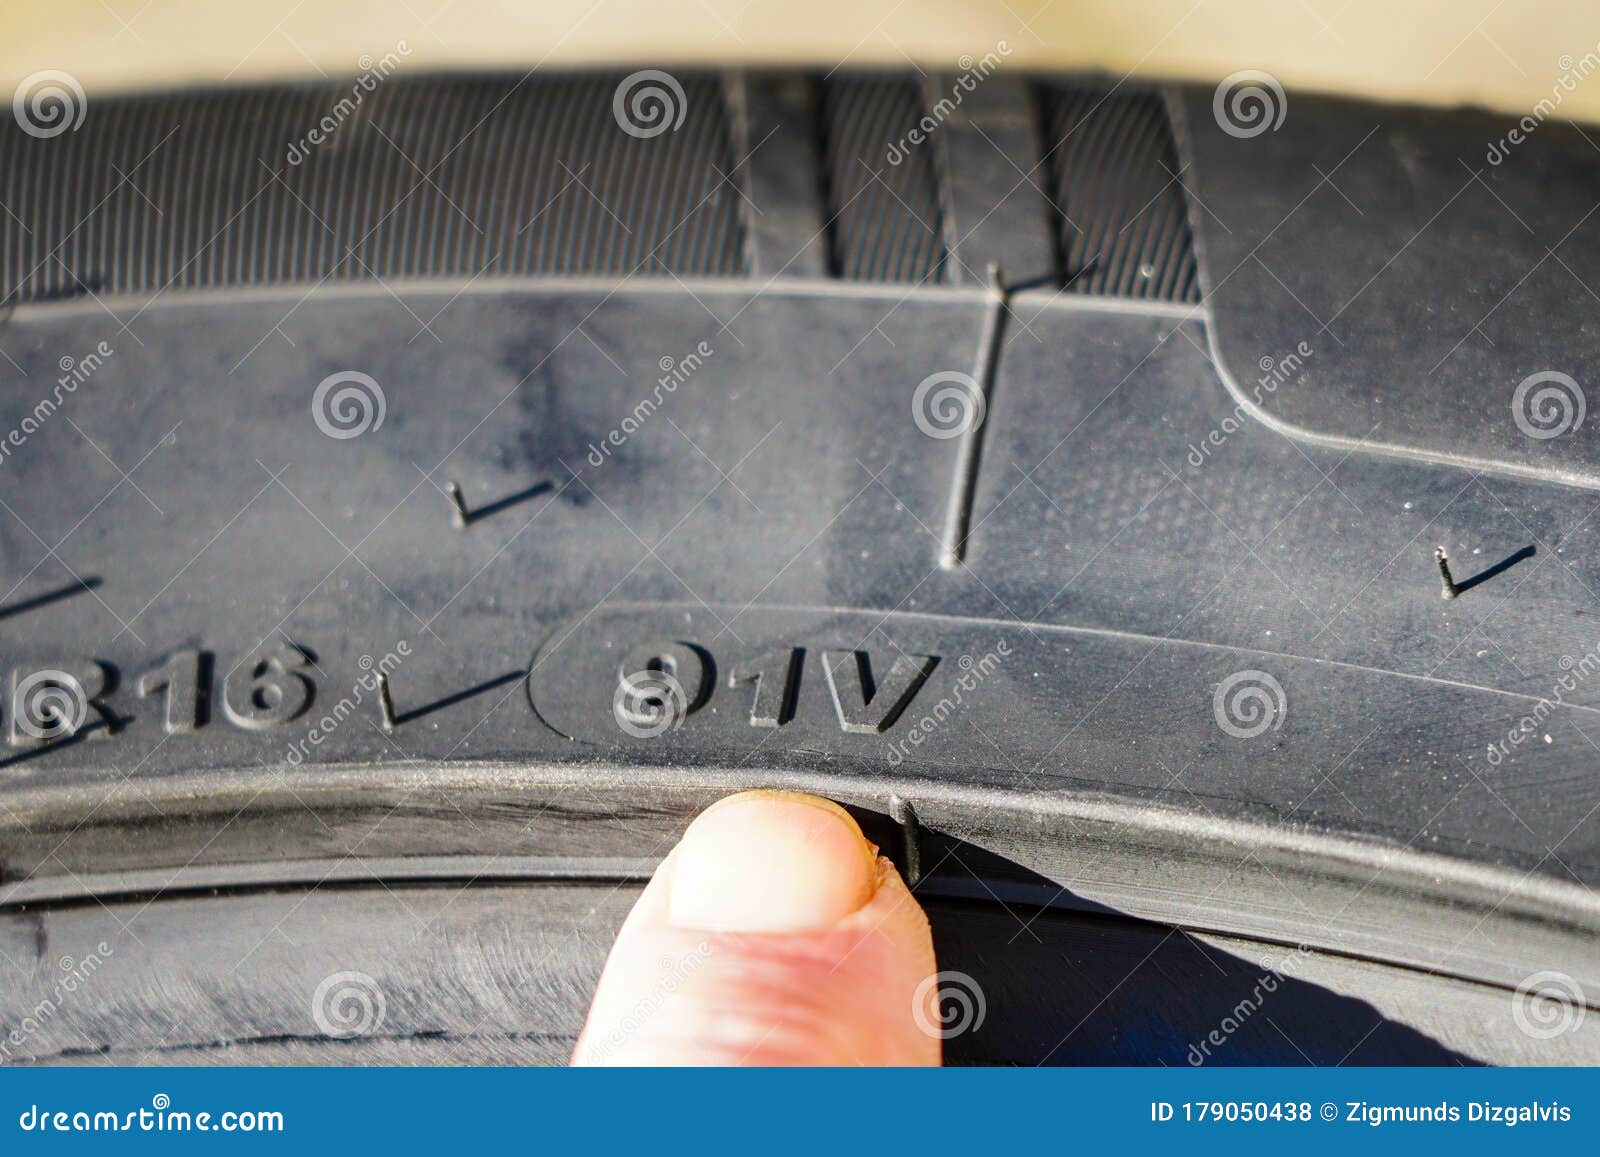 the speed and load index markings on the sidewall of the tire